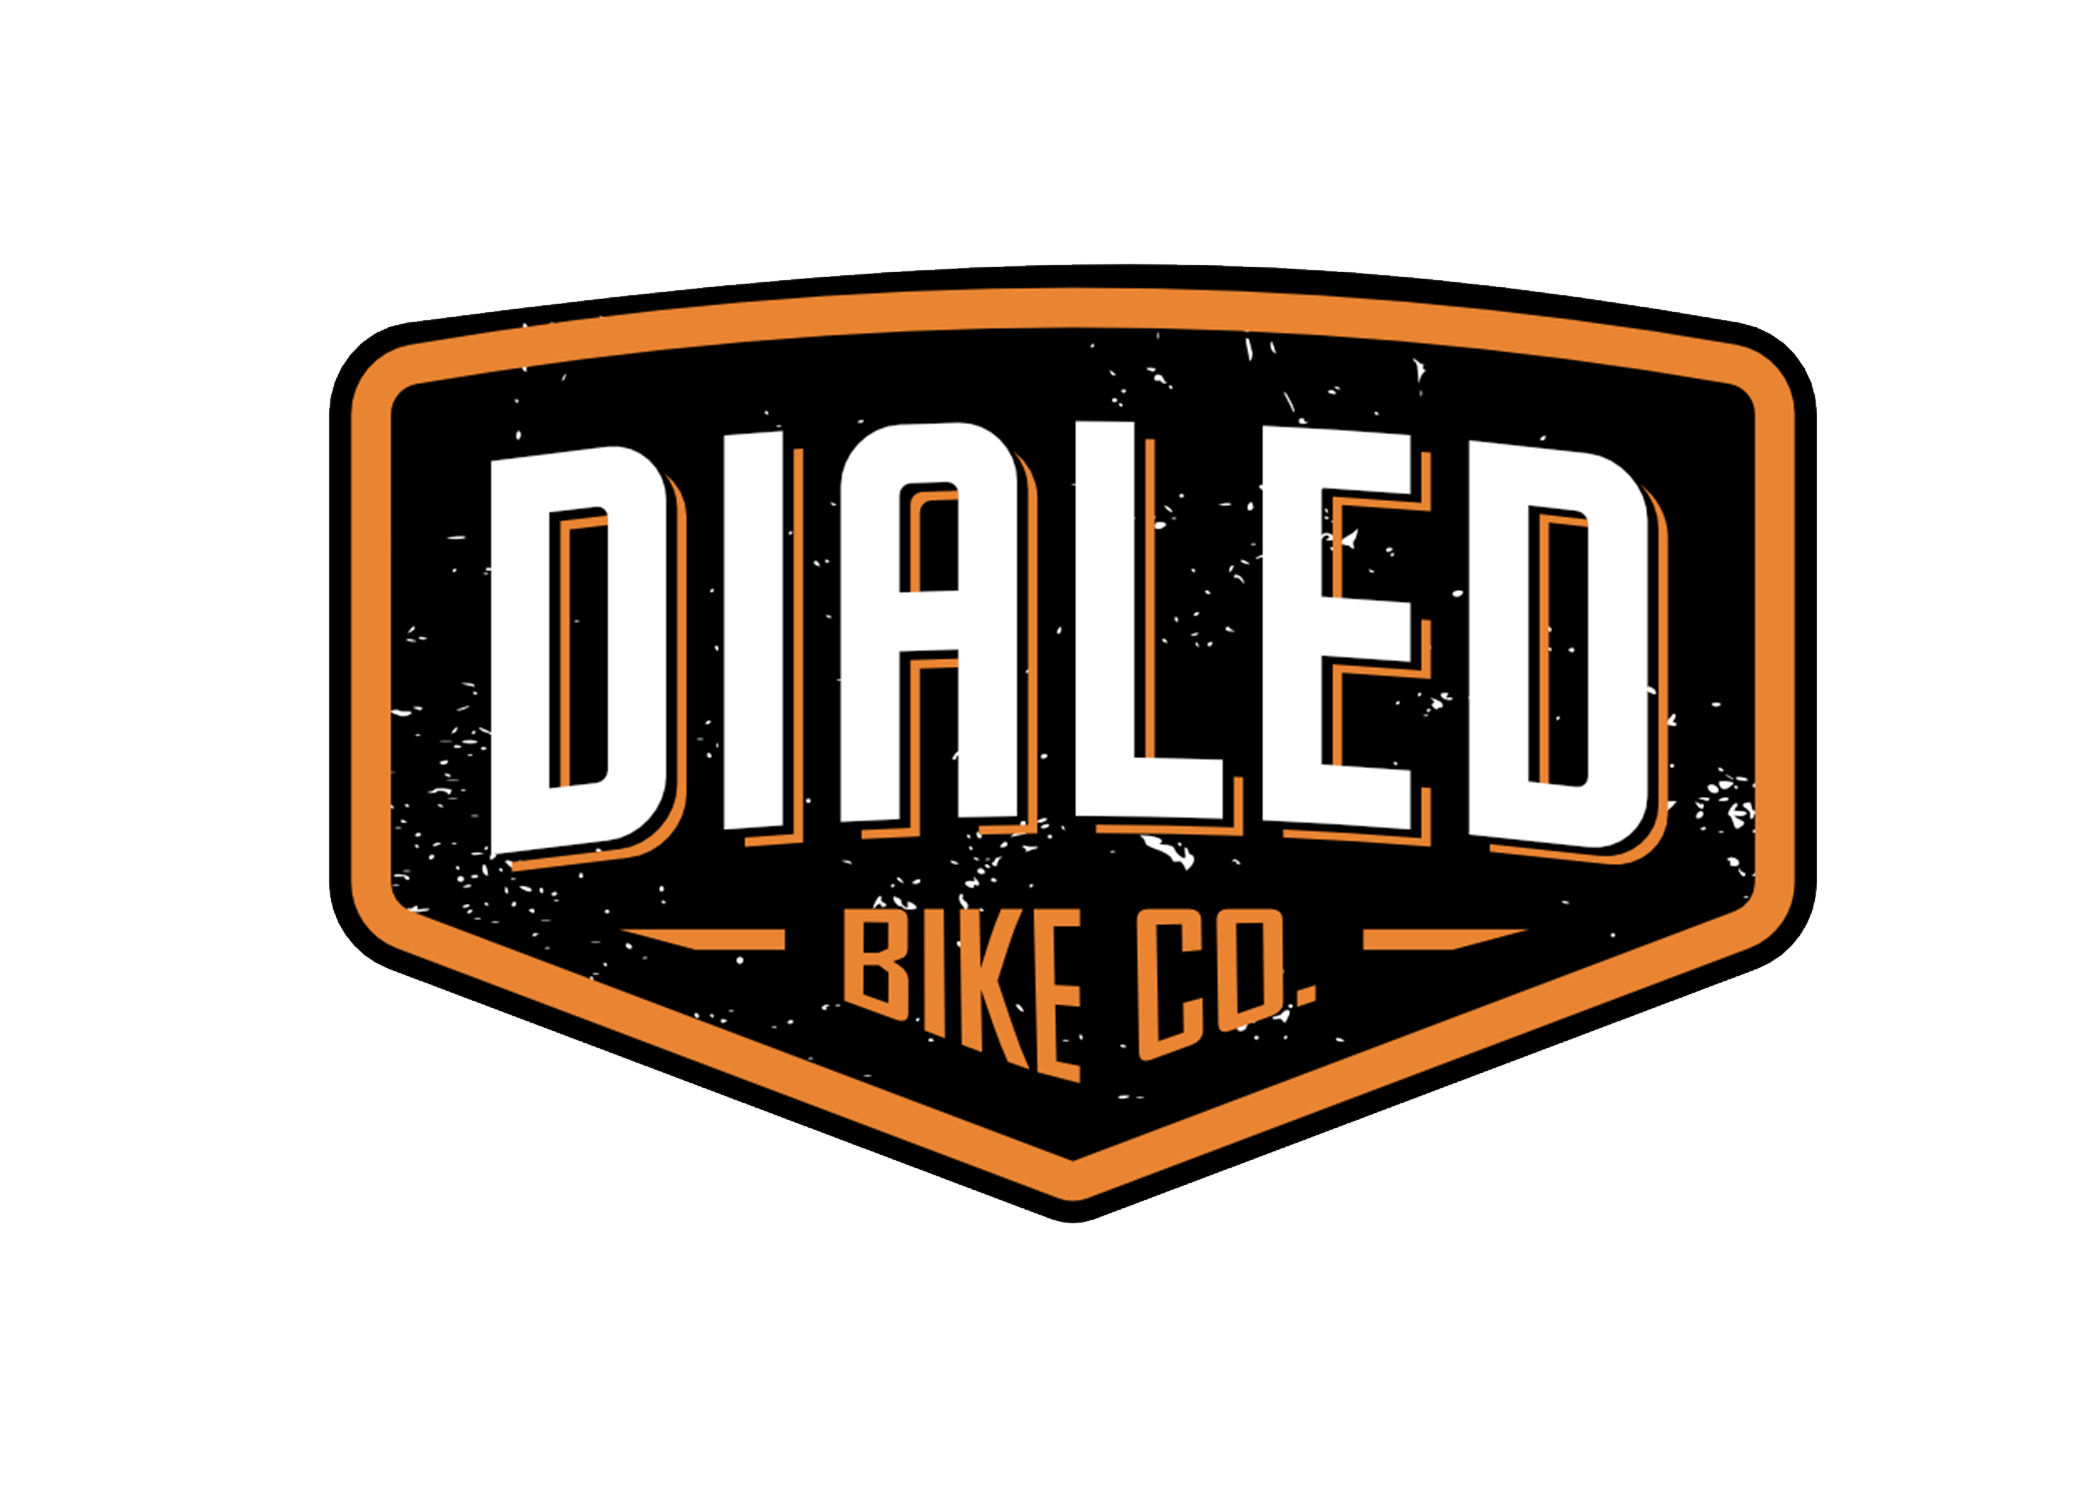 Bike Shop and Mobile Repair Service. Specializing in Mountain Bikes, Service, Parts, Accessories and Apparel.